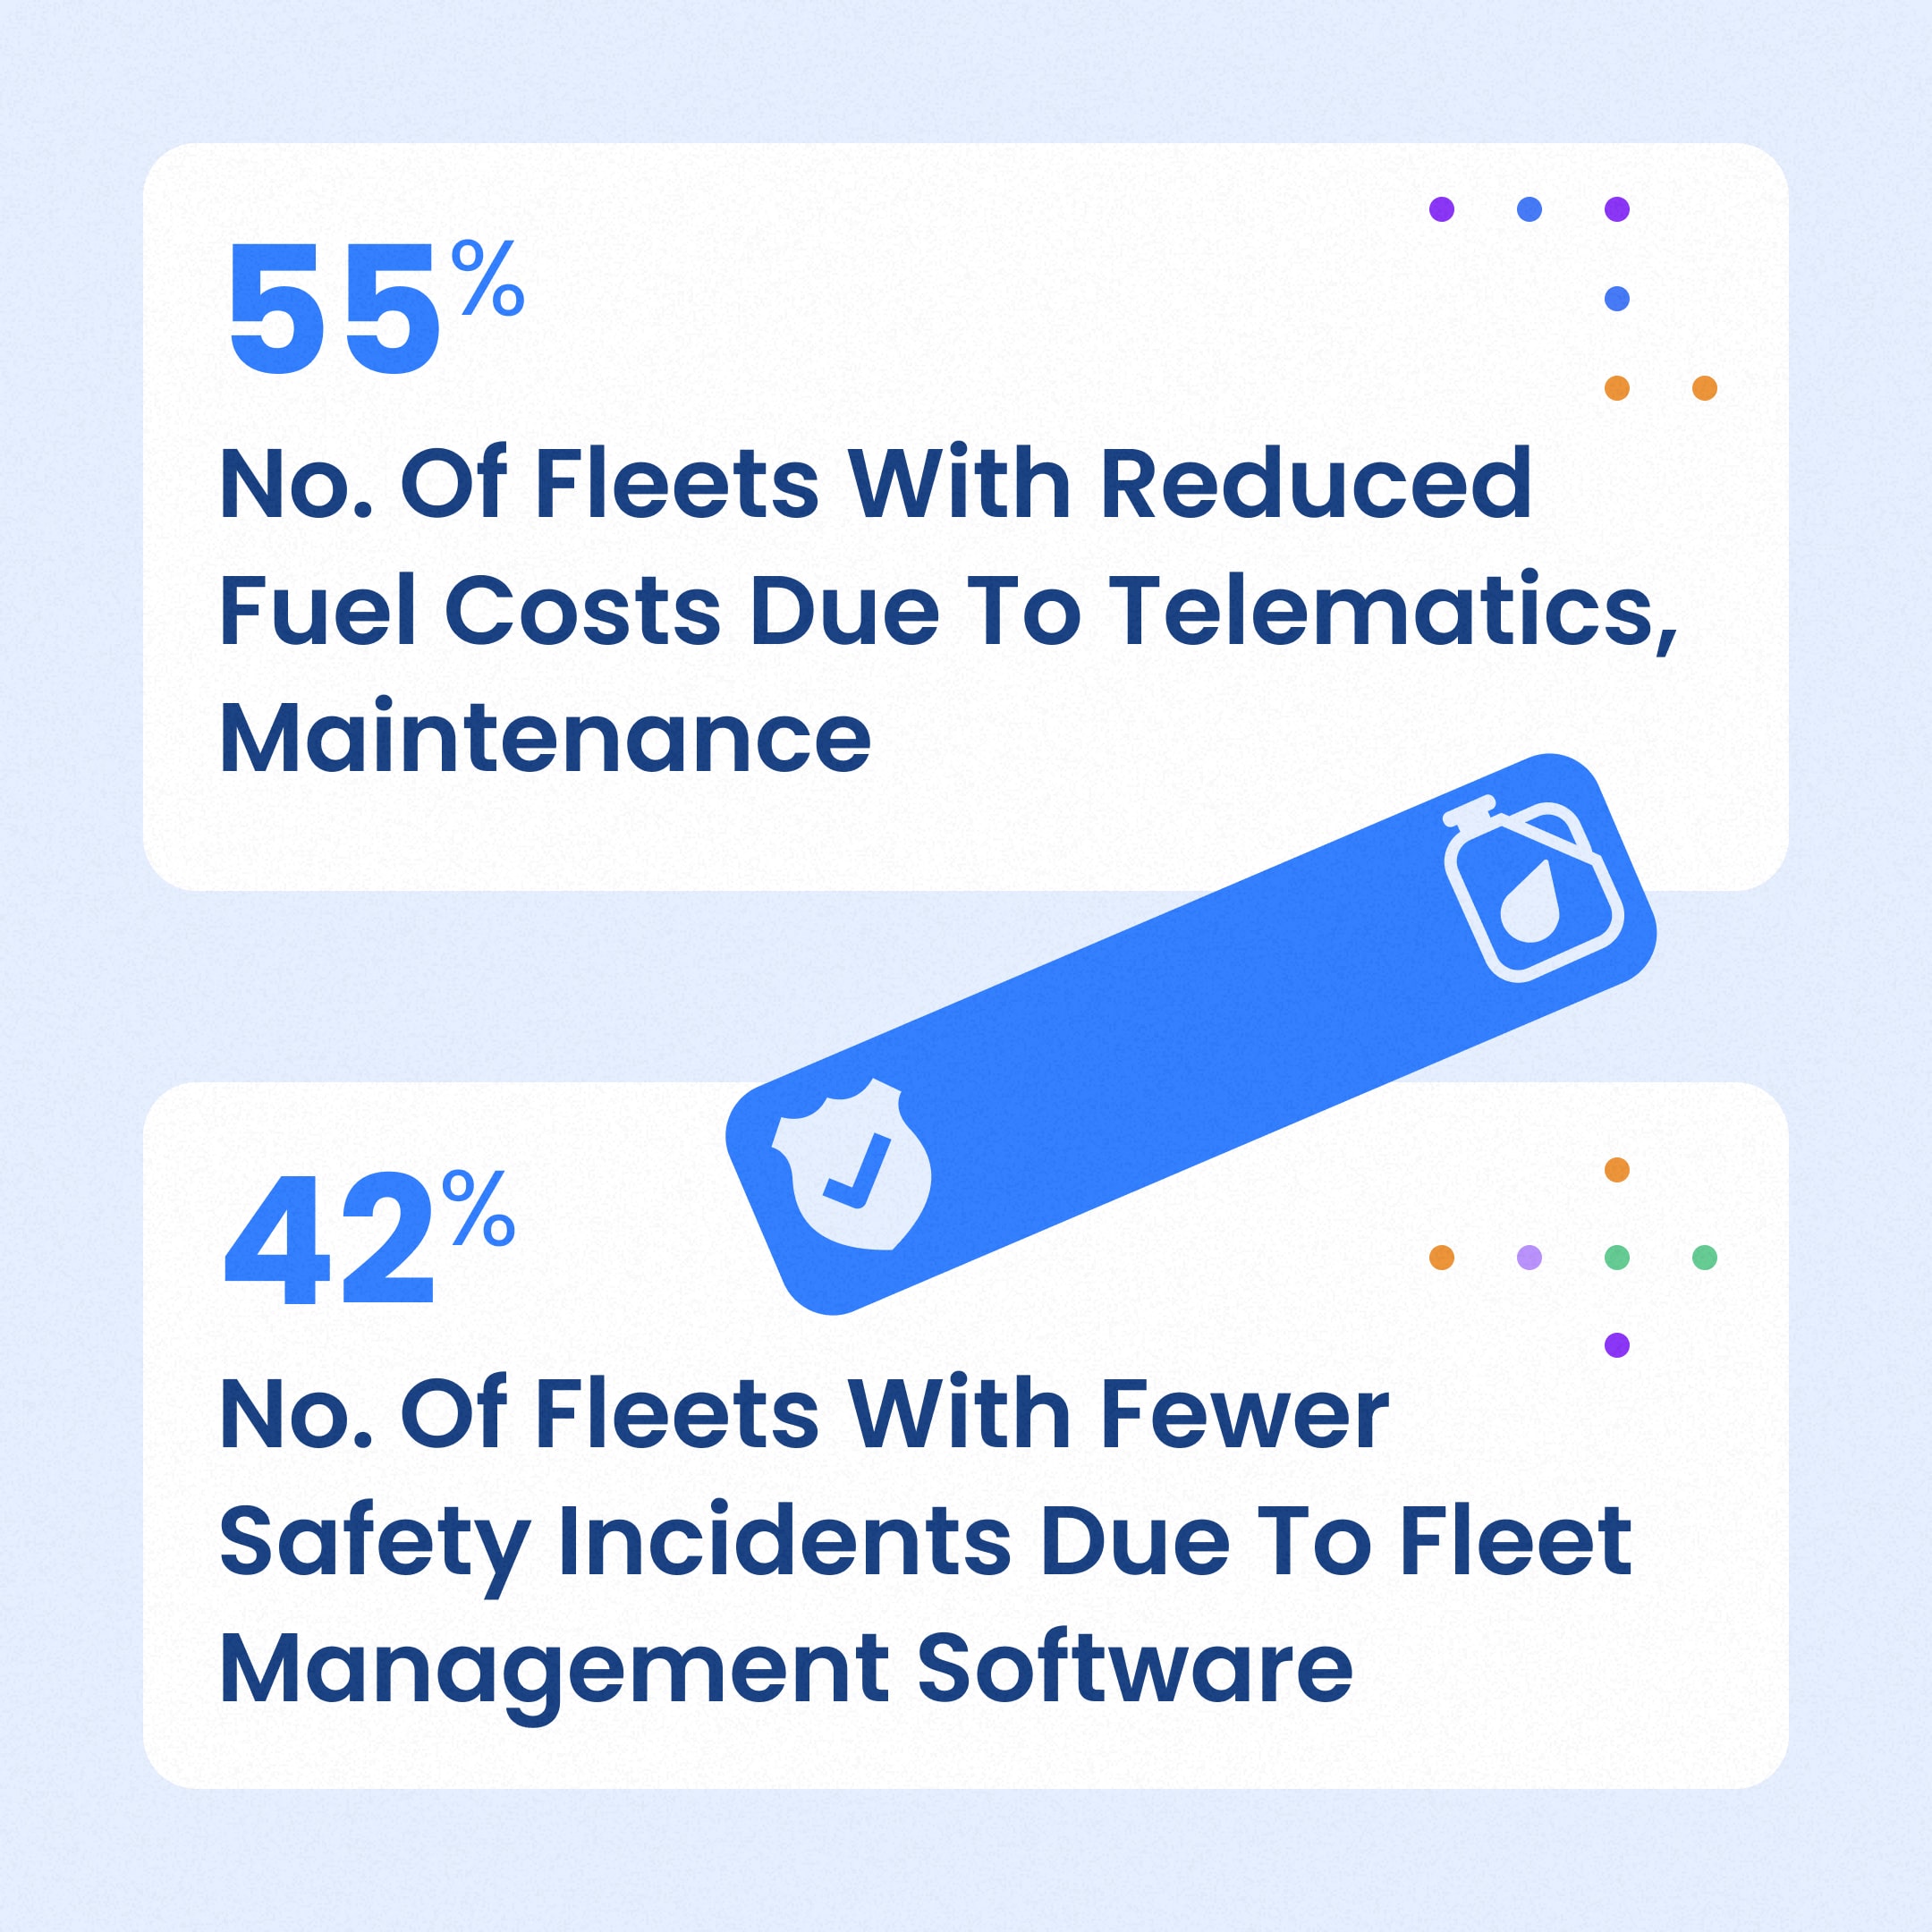 As a matter of fact, 55% of fleets managed to reduce fuel costs due to telematics and preventive maintenance, while 42% of fleets experienced fewer safety incidents by using fleet management software.